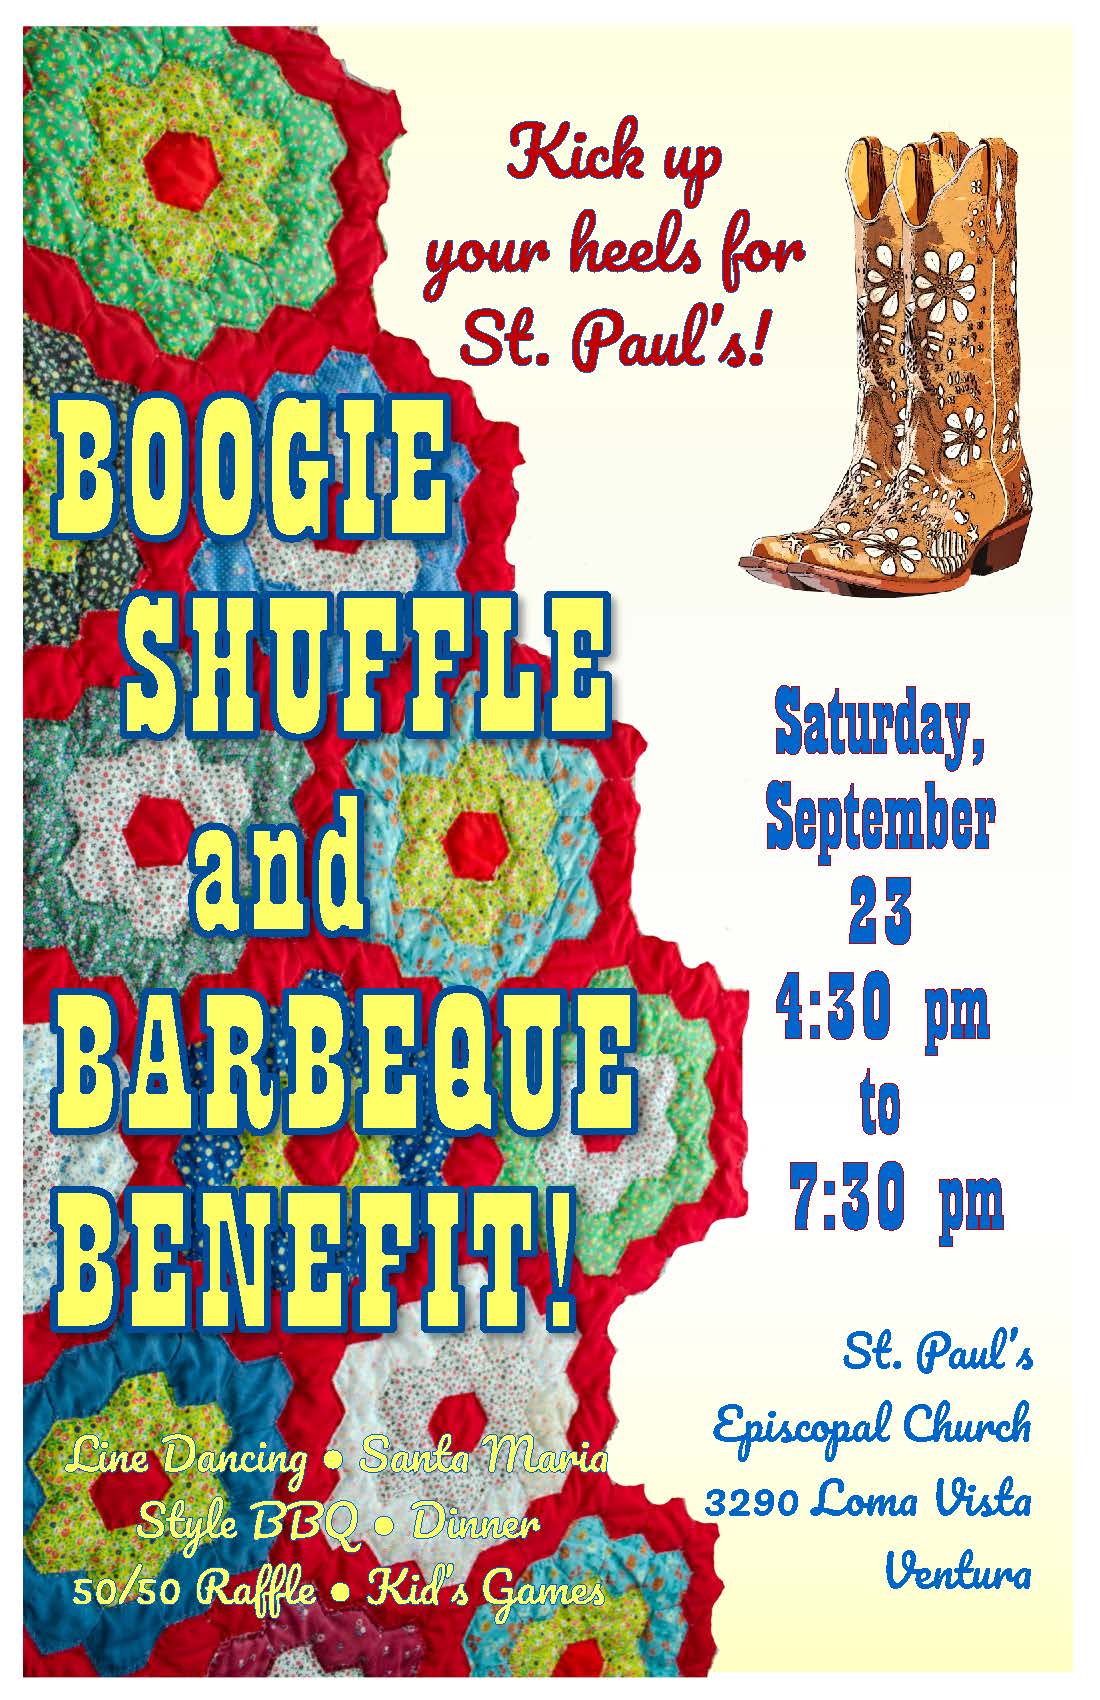 01-sp-line-dancing-benefit-flyer-with-qr-2-sided-page-1_722